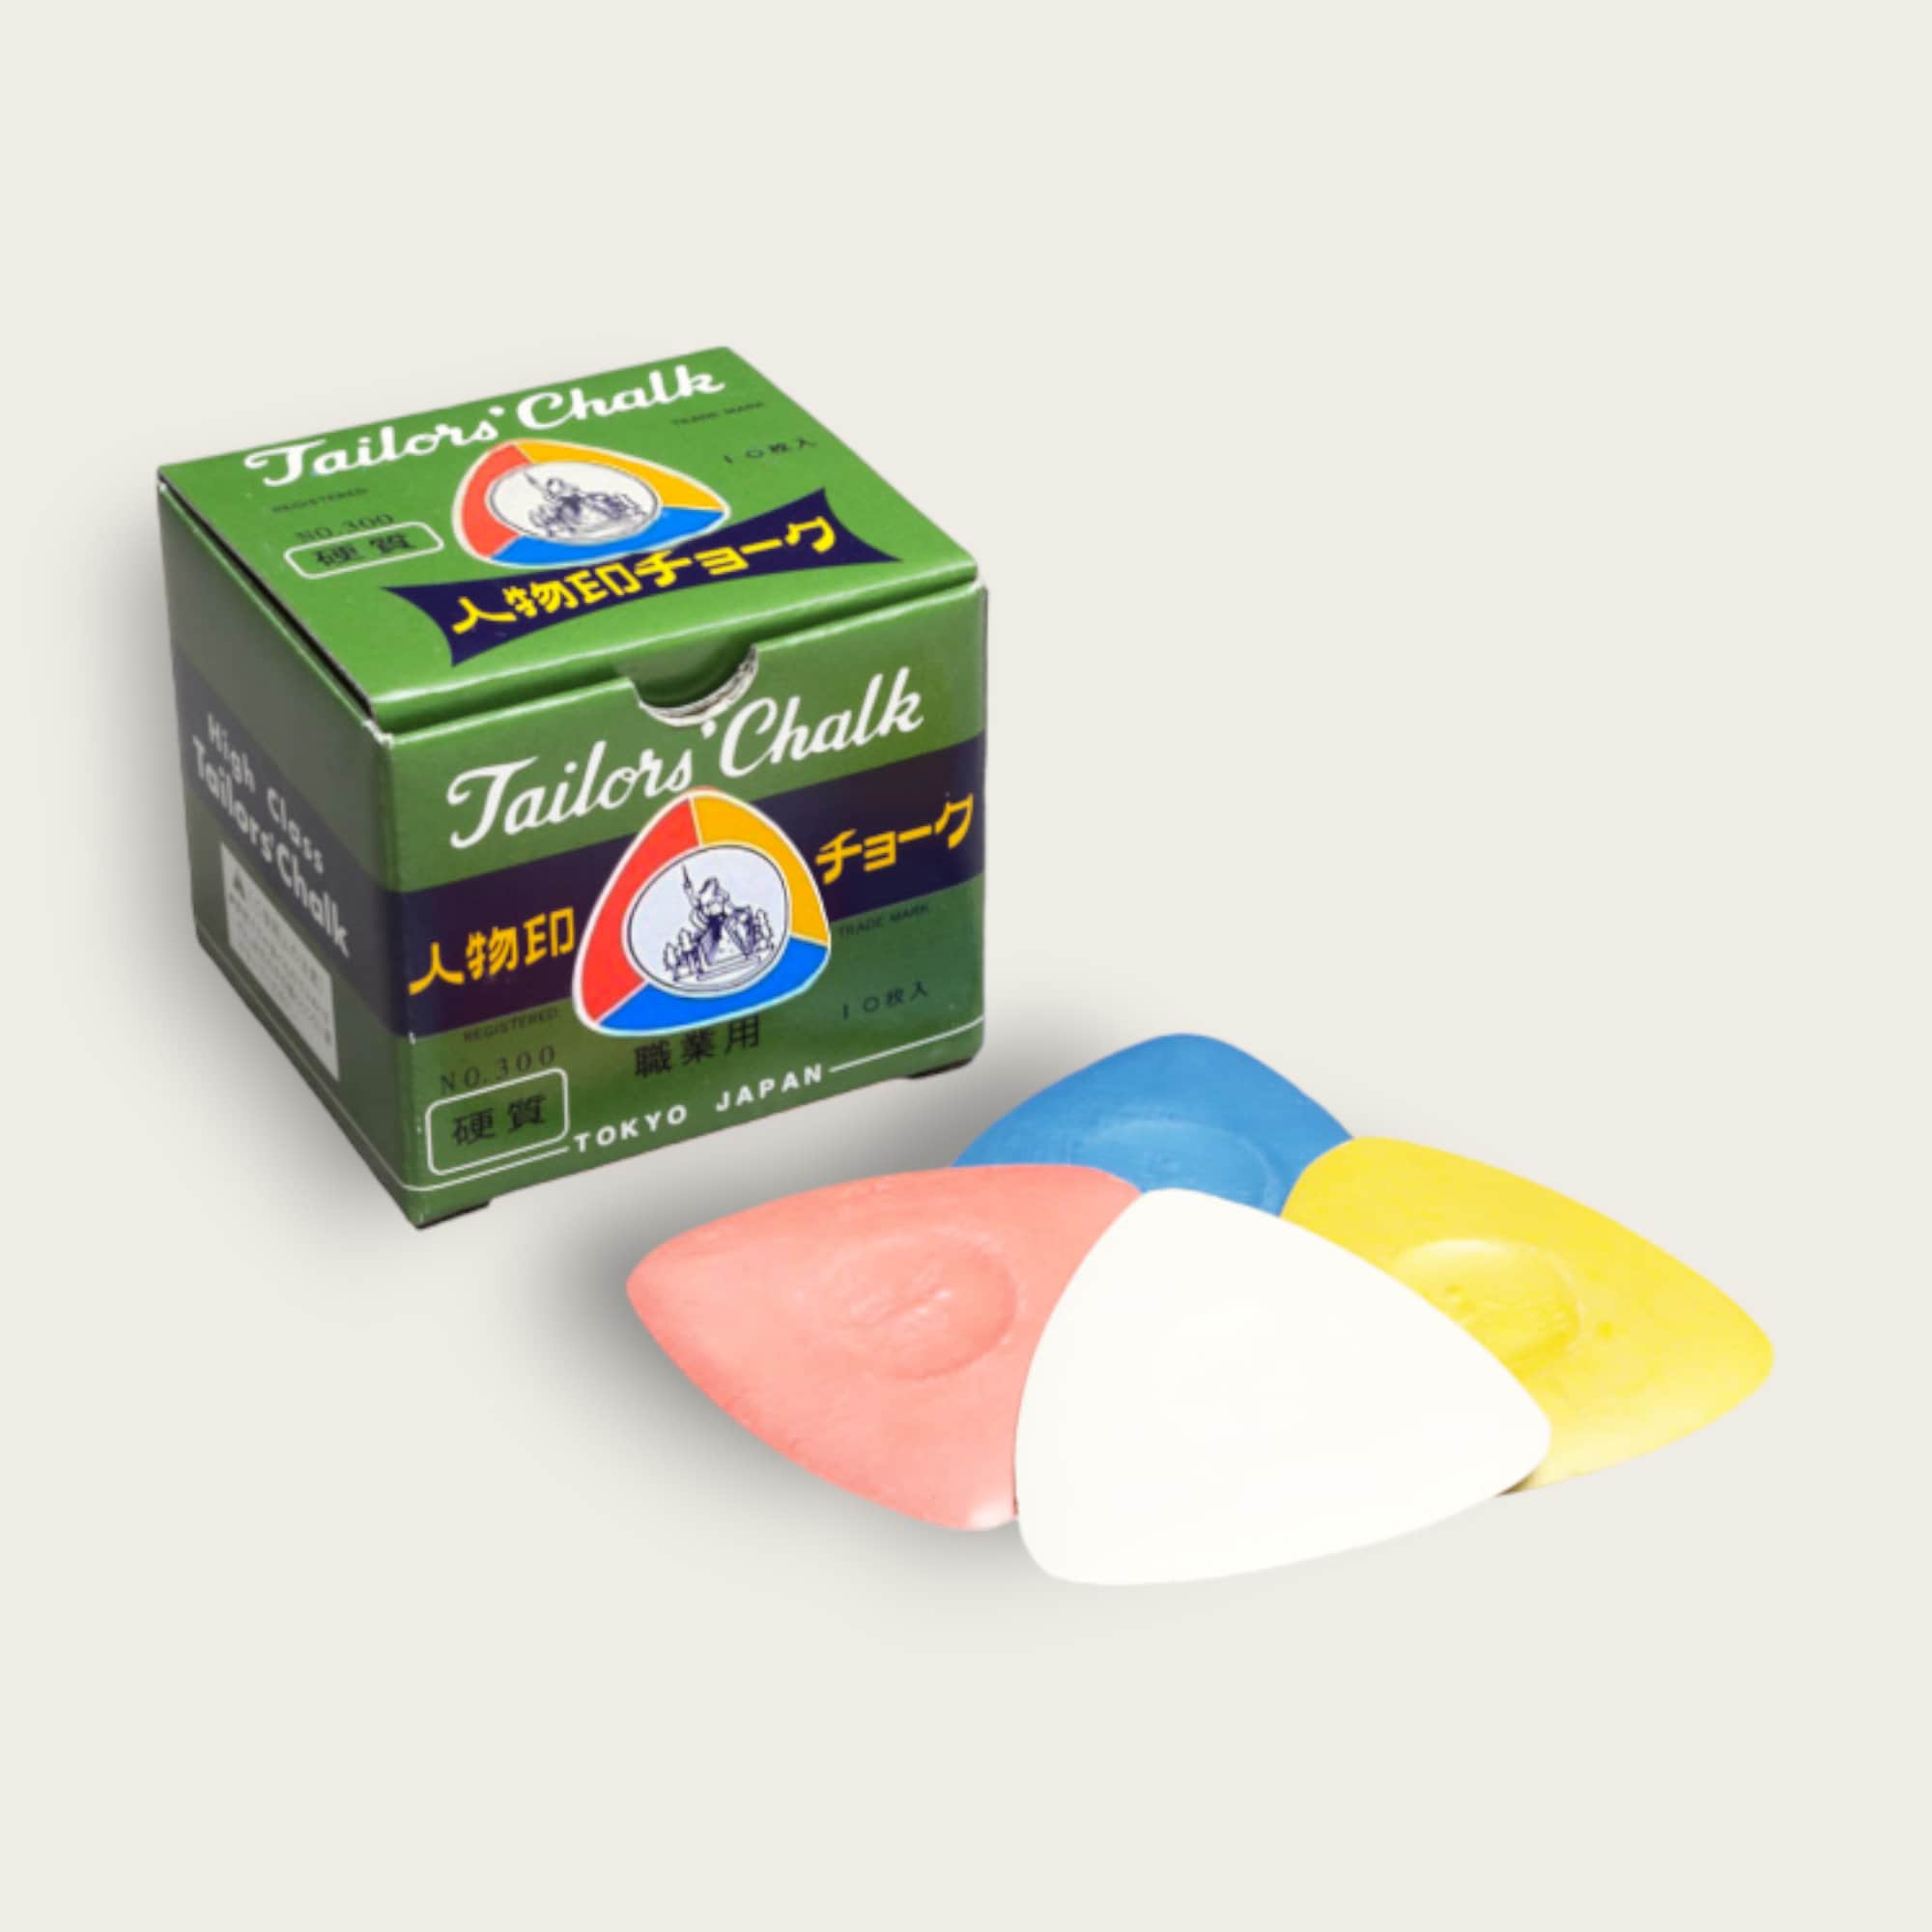 Tailors Chalk Colorful Fabric Tailors Chalk with Triangle Shape